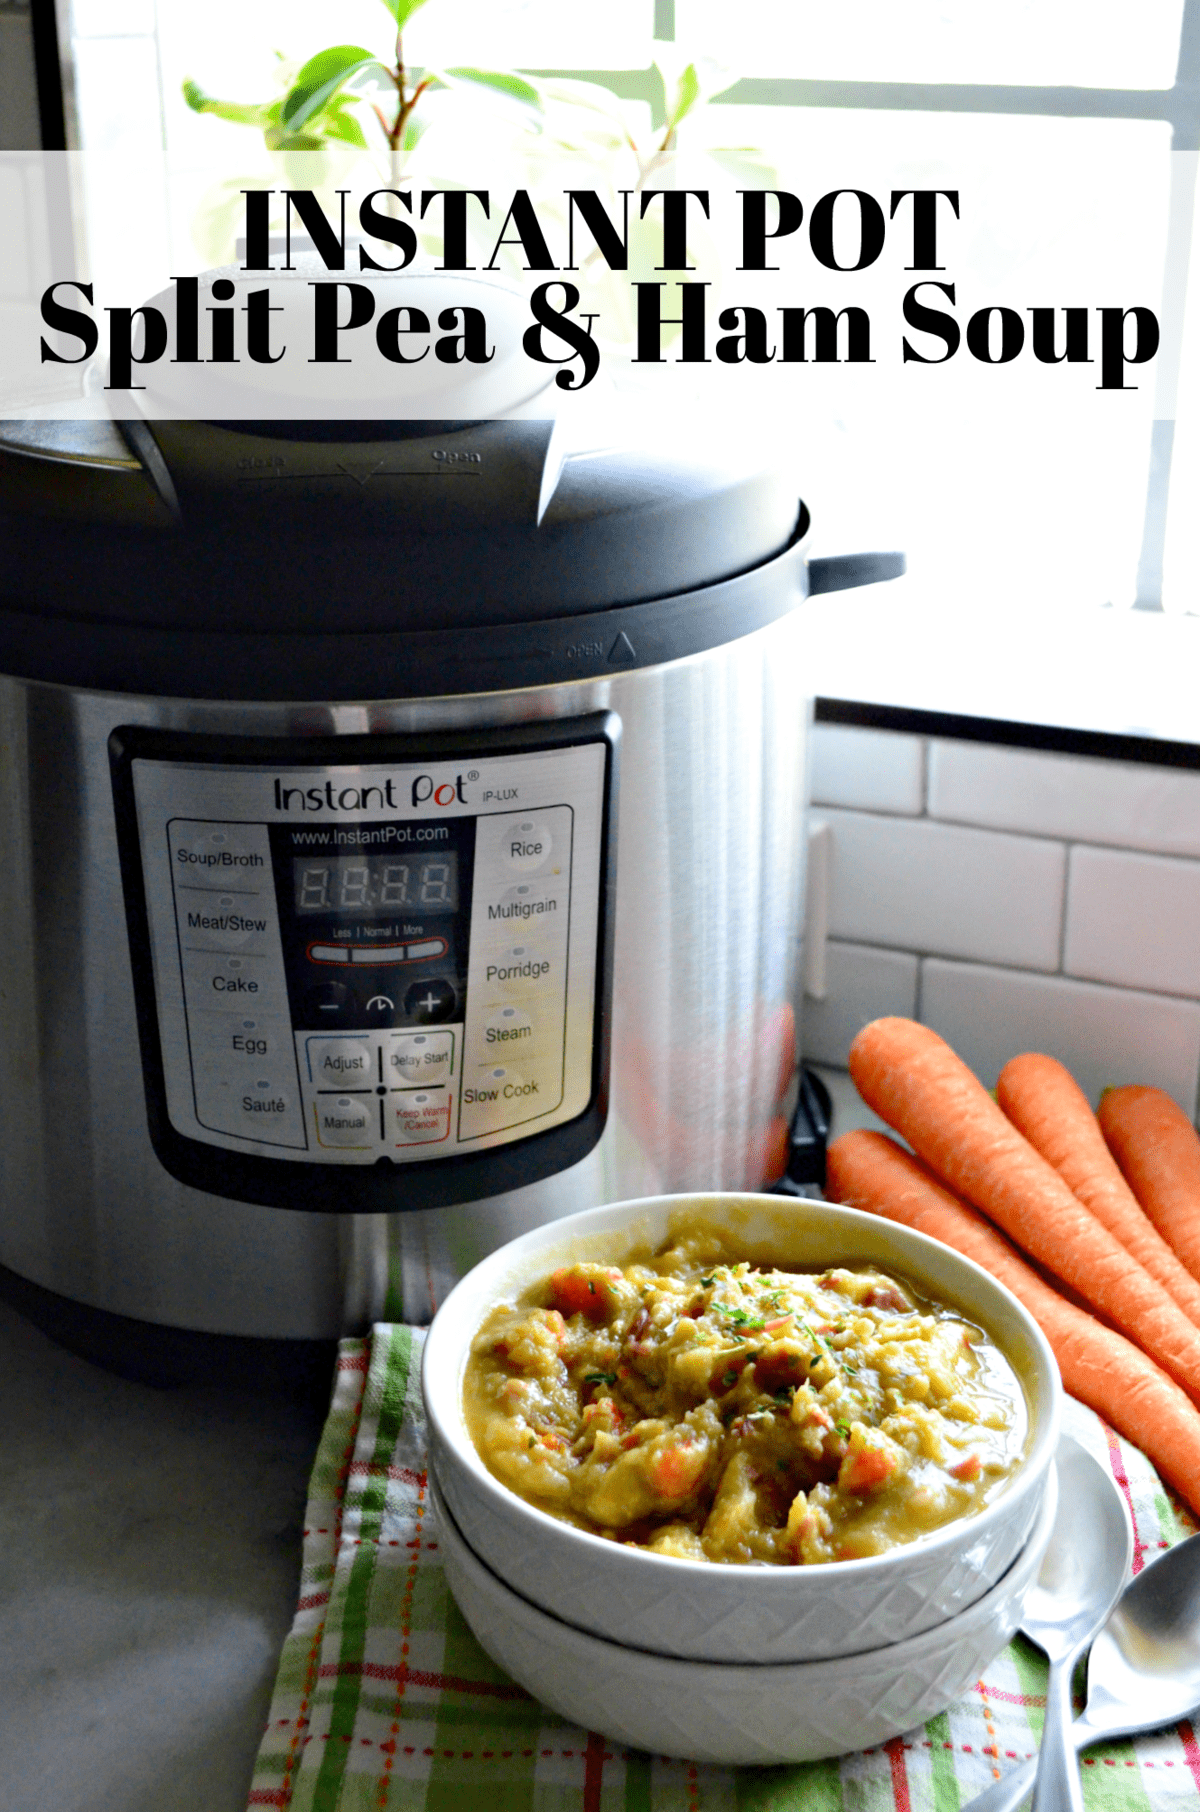 Instant Pot Split Pea & Ham Soup in white bowl in front of instant pot and carrots with title text.